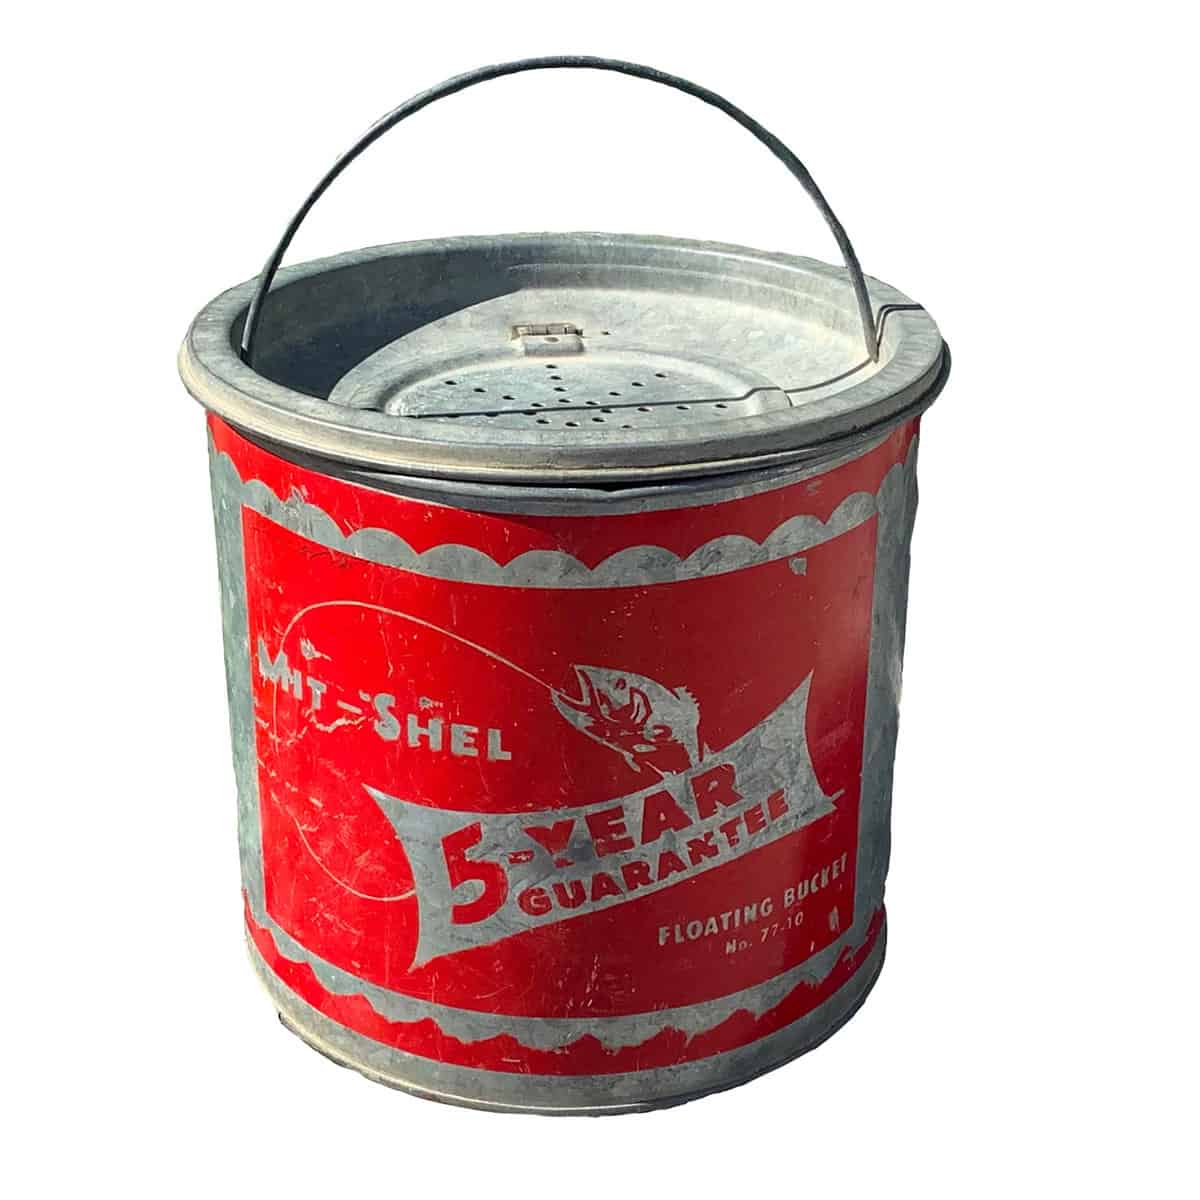 Vintage minnow bucket with red painted label.